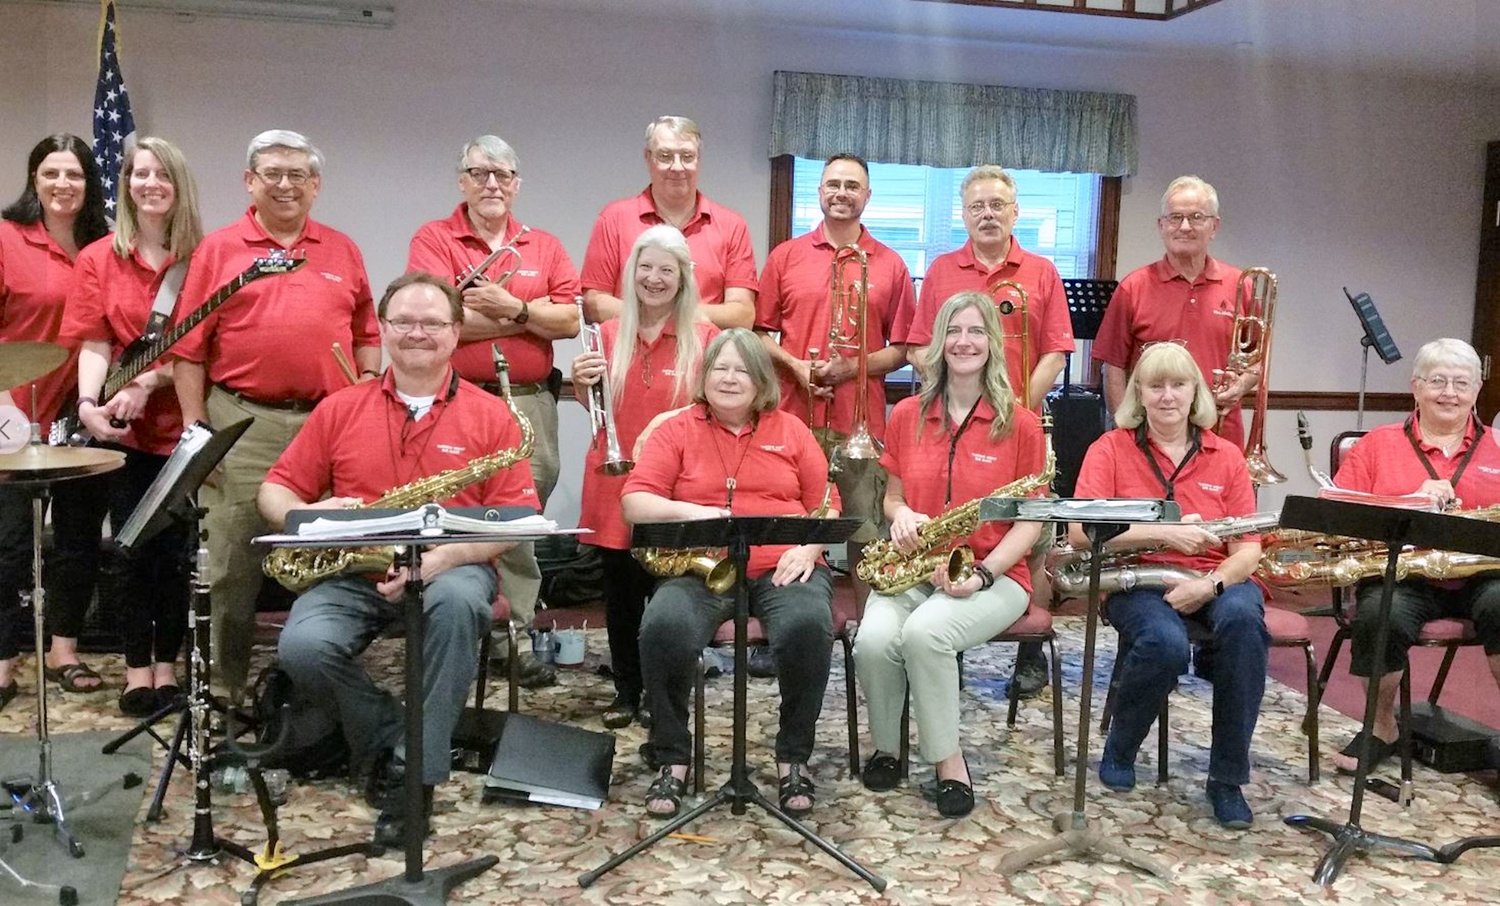 The Tuesday Night Big Band plays at 7 p.m. Oct. 4 at the Oneida County History Center in Utica.